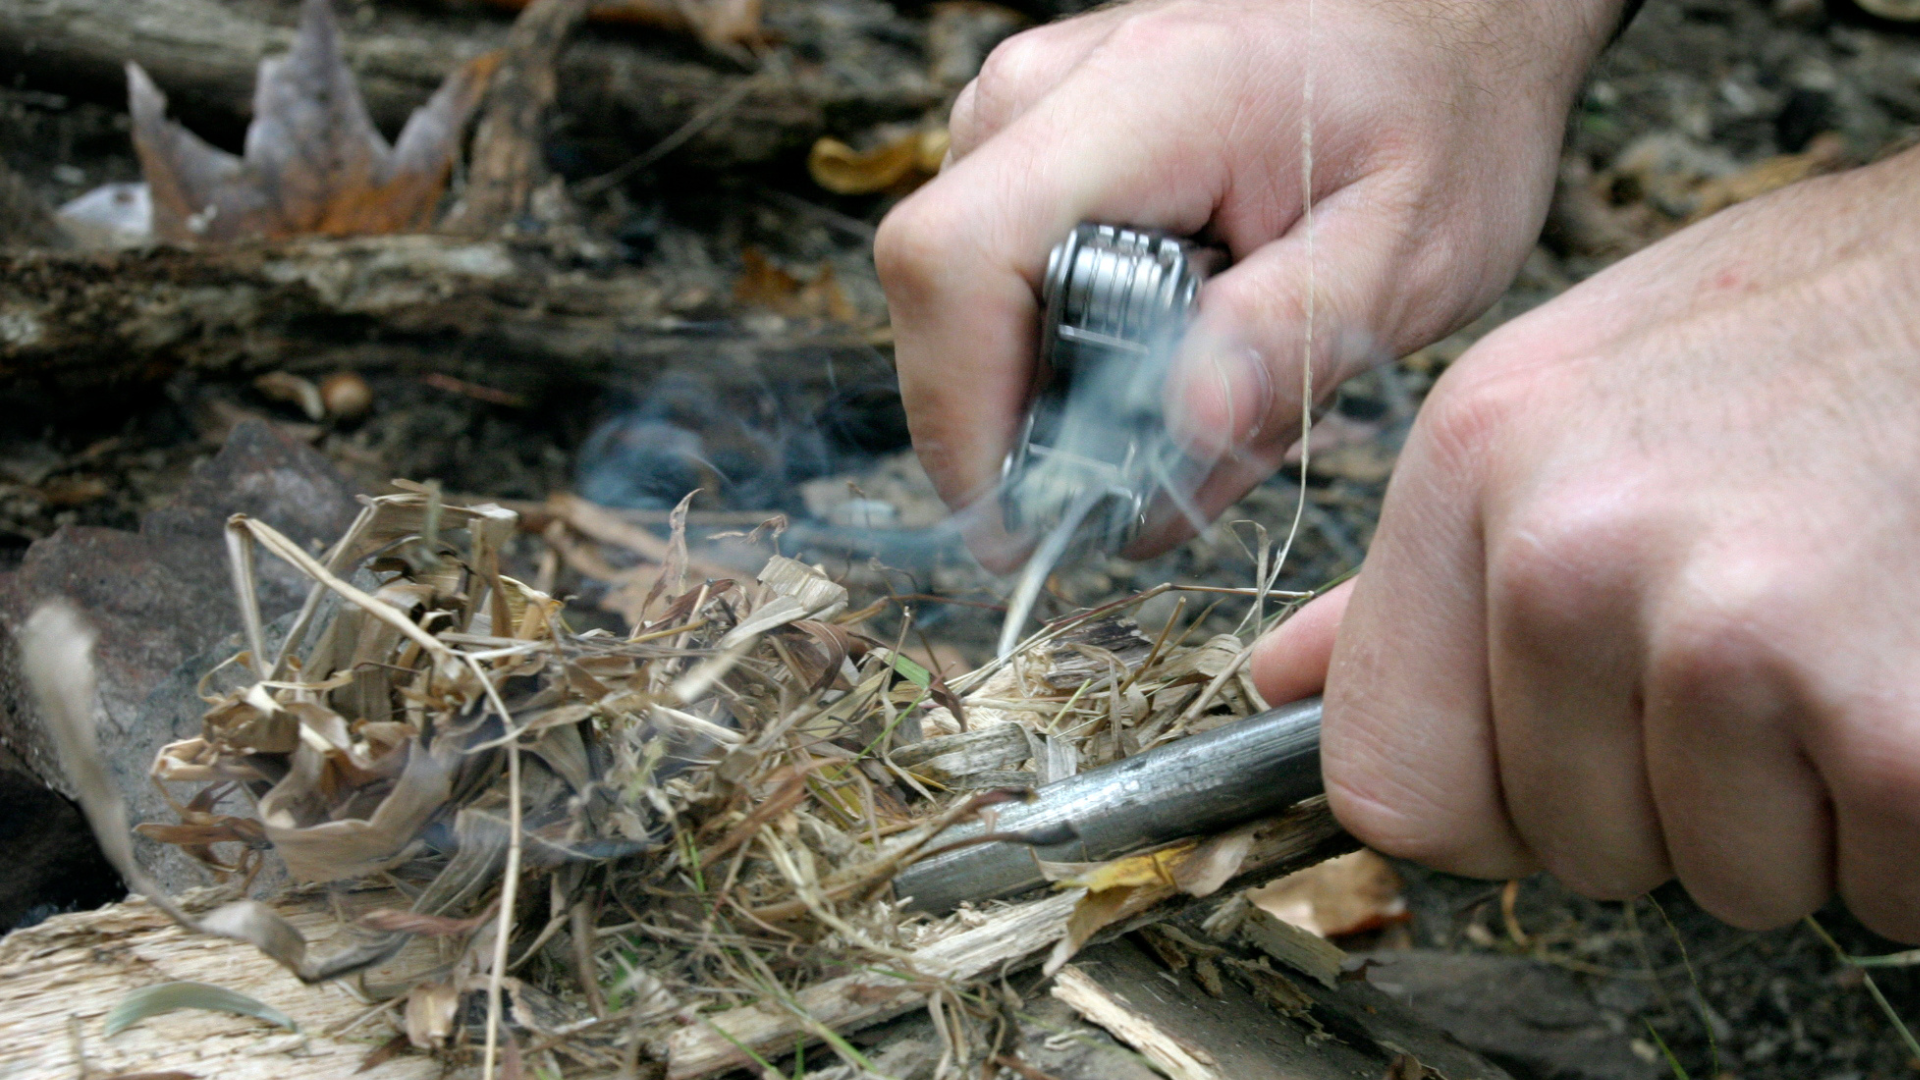 Making fire from magnesium fire starter